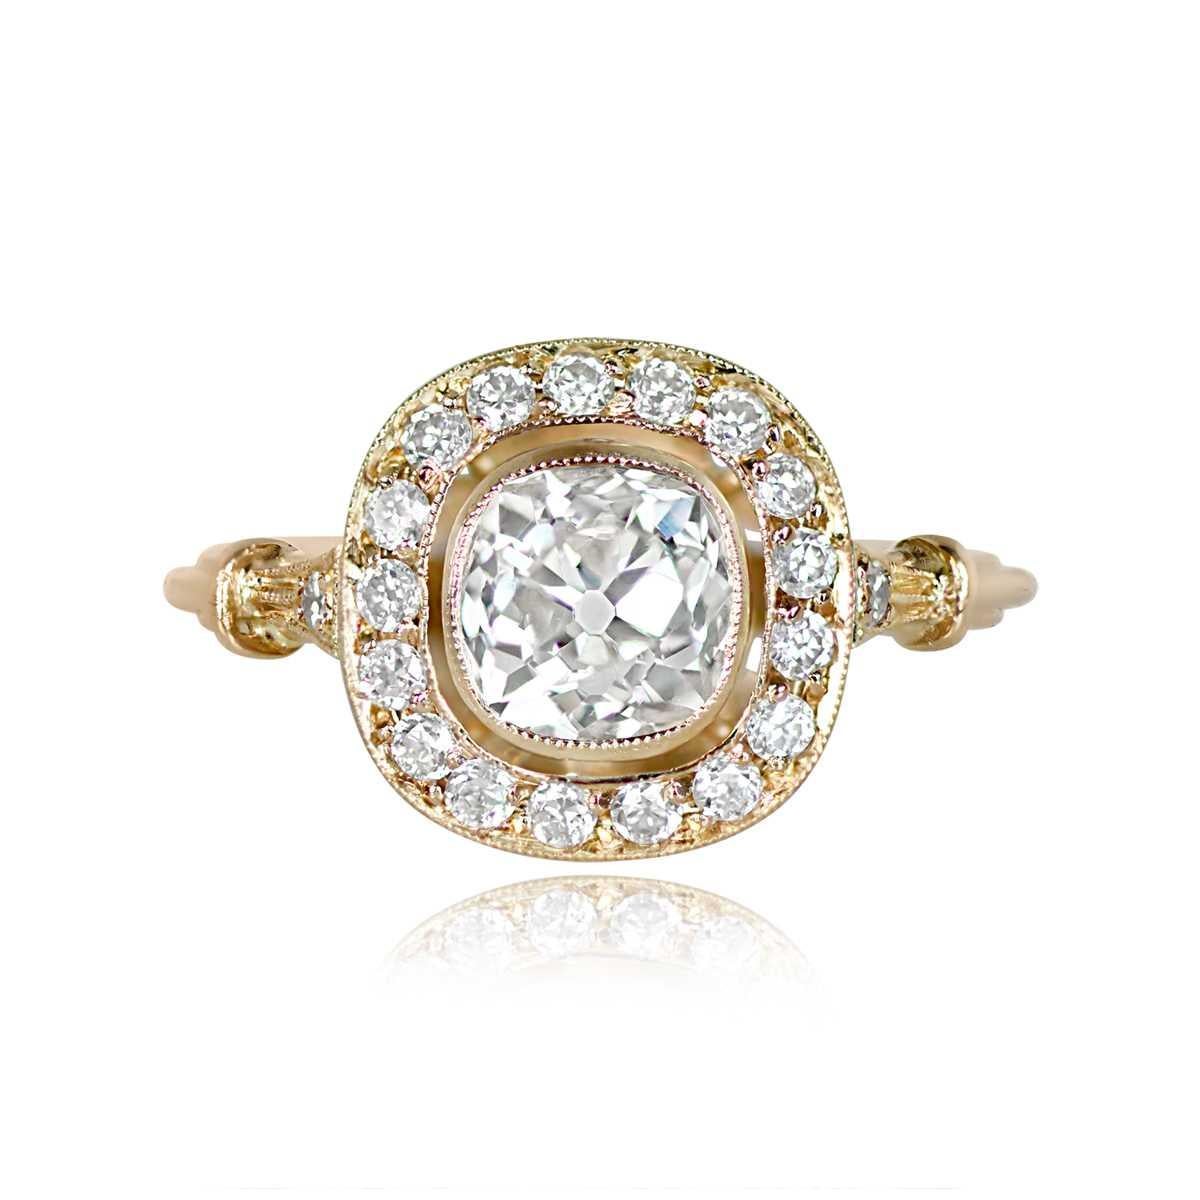 This antique engagement ring showcases a 1.16-carat cushion-cut diamond (J color, VS2 clarity) at its center, encircled by a bezel-set halo of old European cut diamonds. The exquisite design features an 18k yellow gold setting with intricate